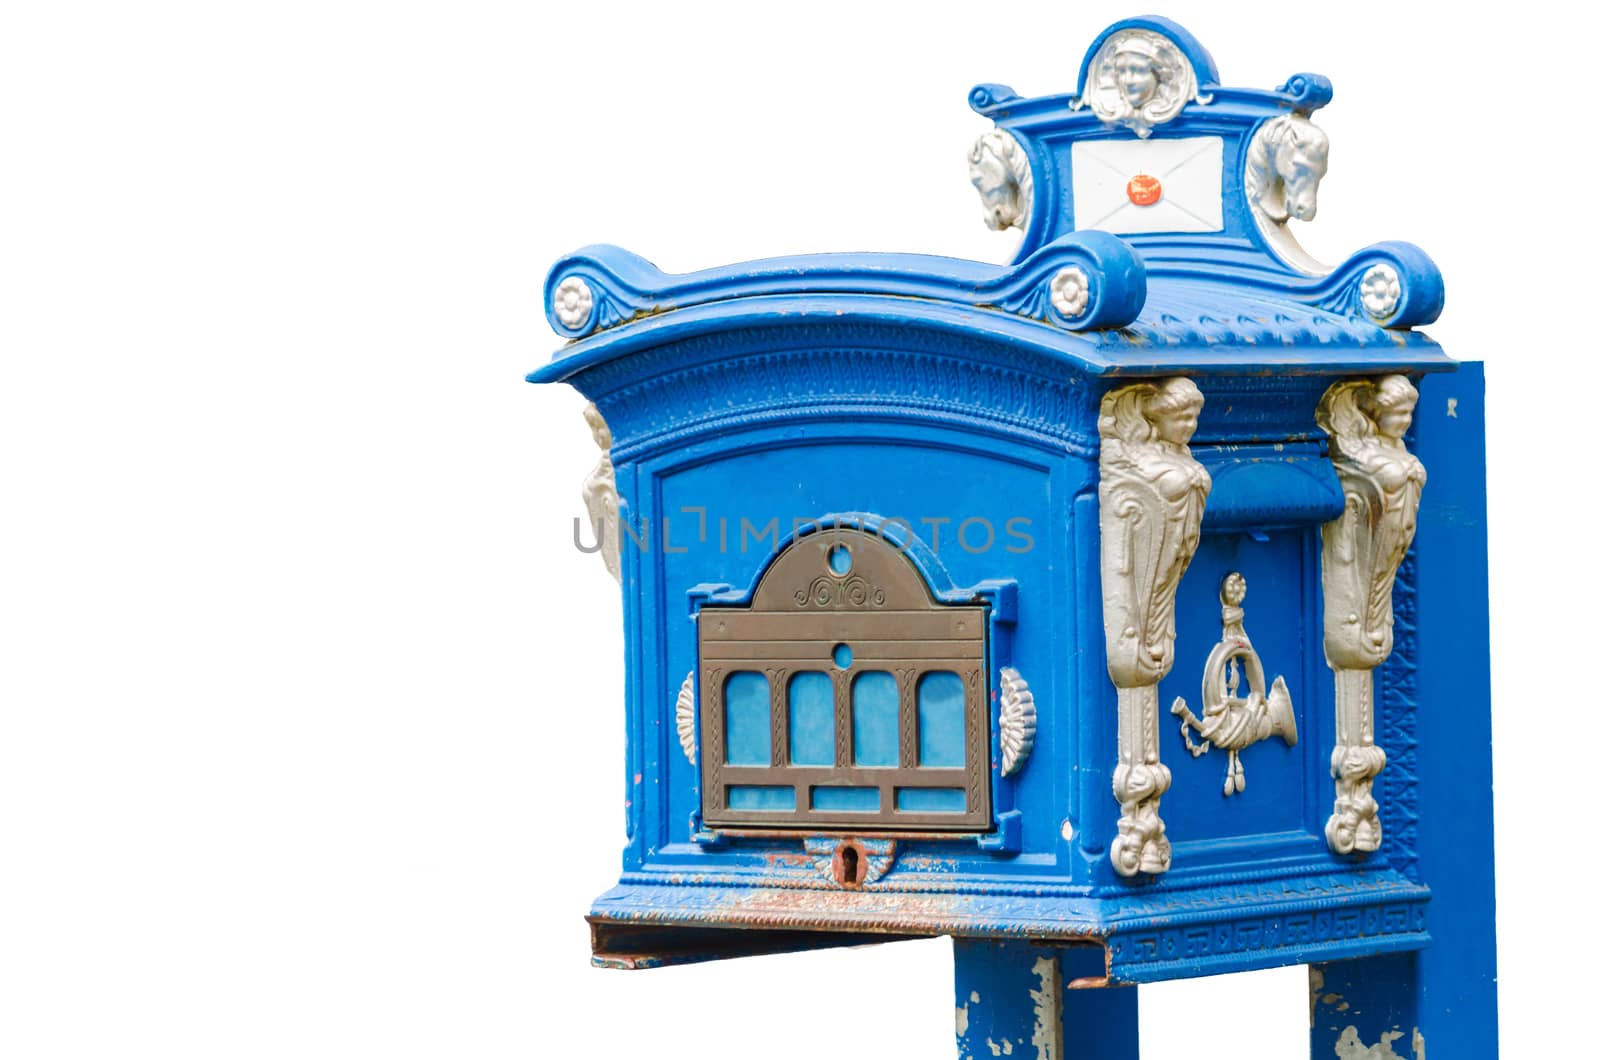 Antique Blue mail box against a white background